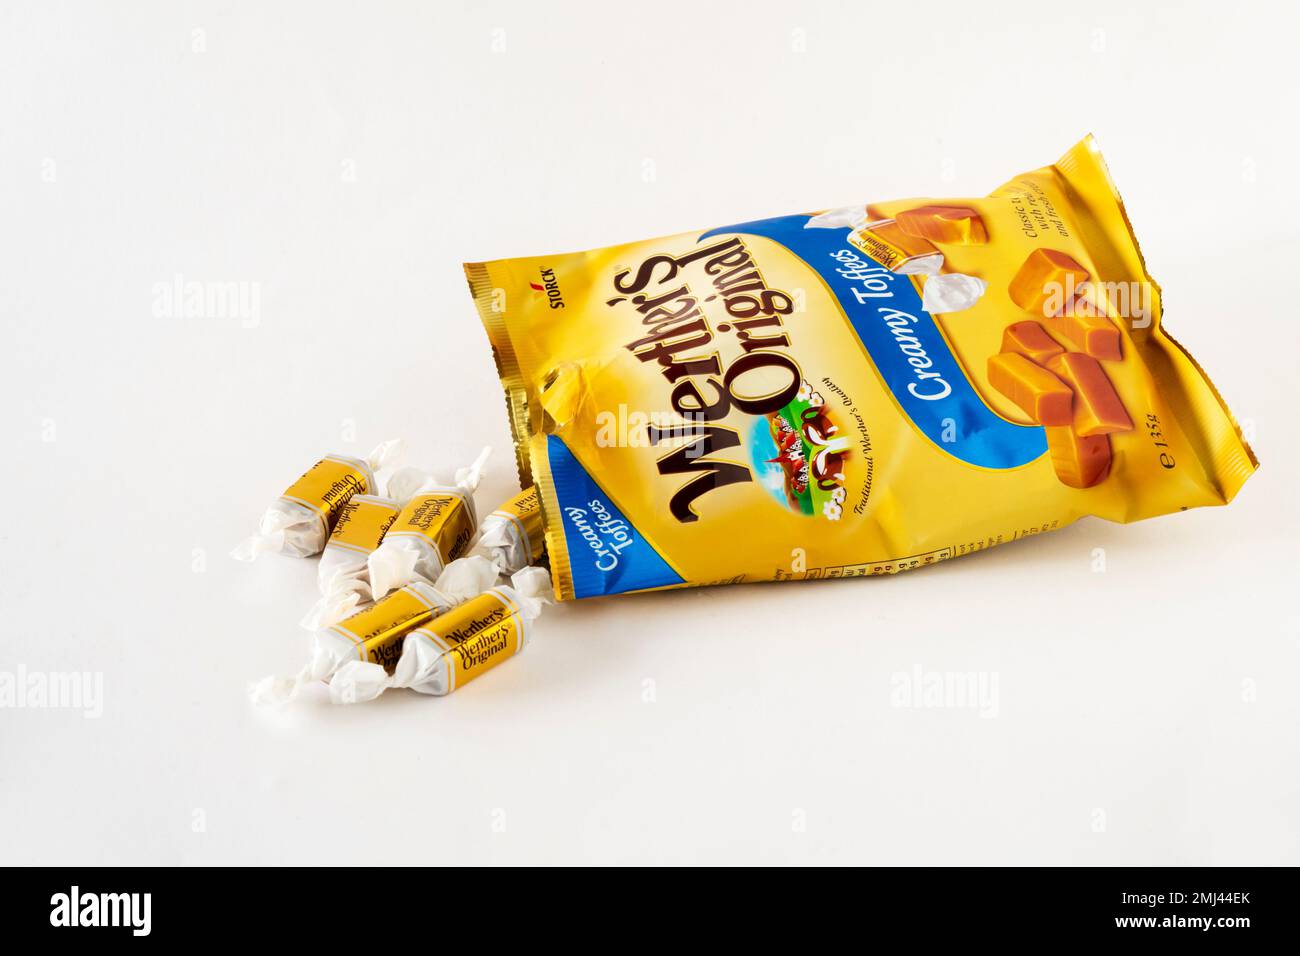 A bag of Werther's Originals Creamy Toffees. Stock Photo